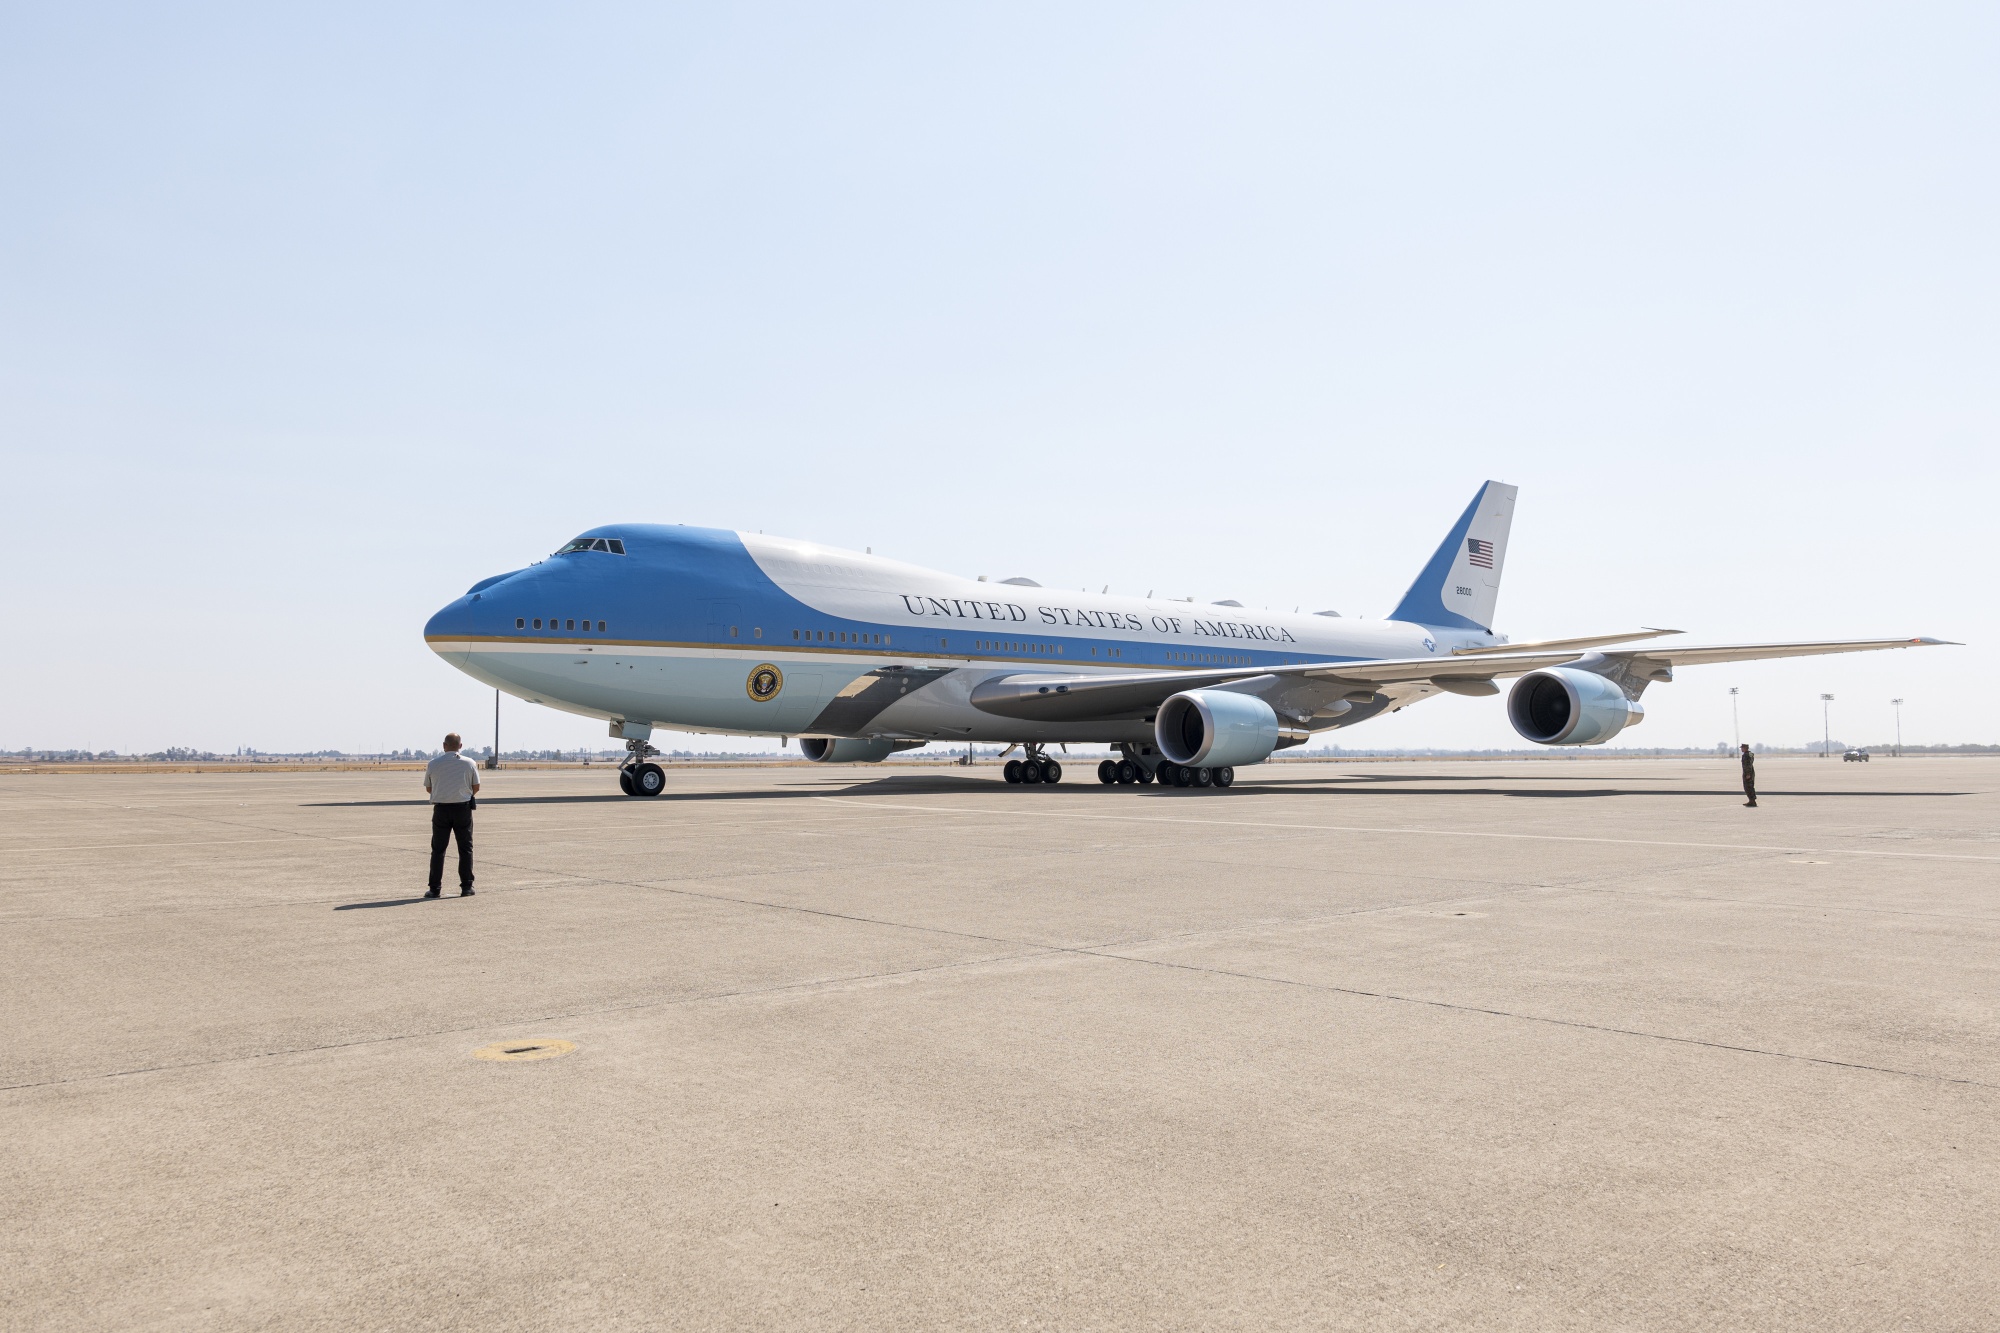 Air Force One: 8 Fascinating Facts About the President's Plane